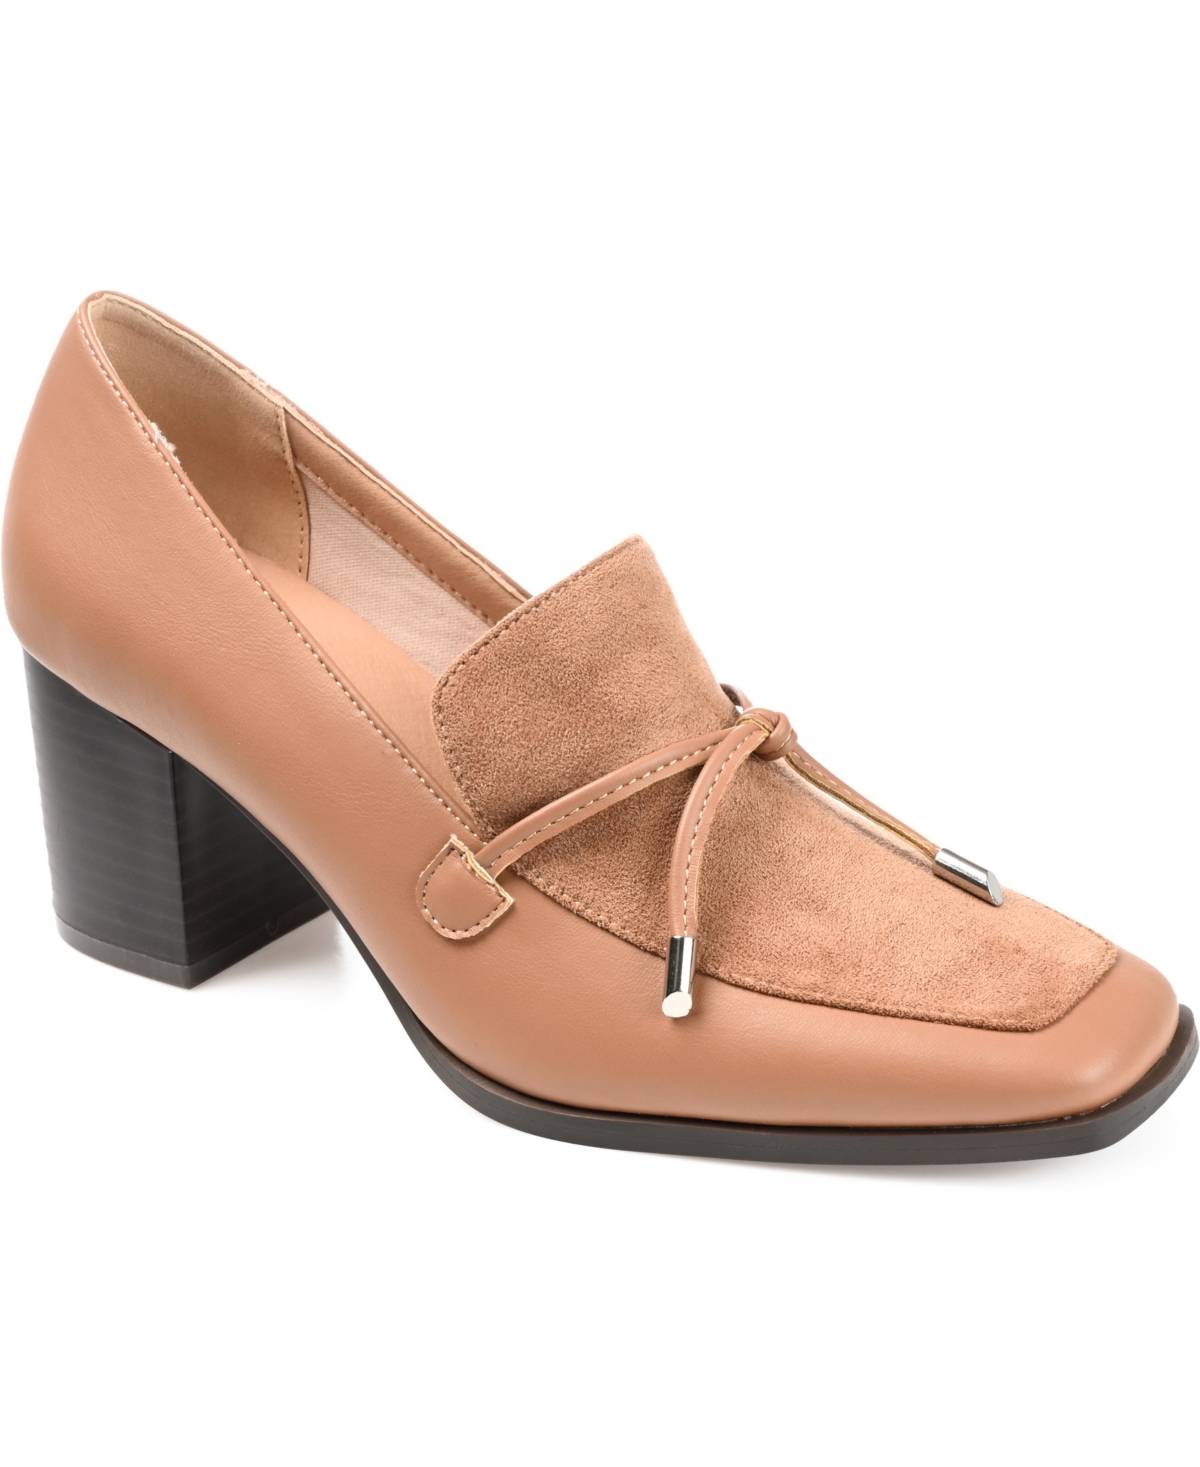 Women's Crawford Loafers - Taupe